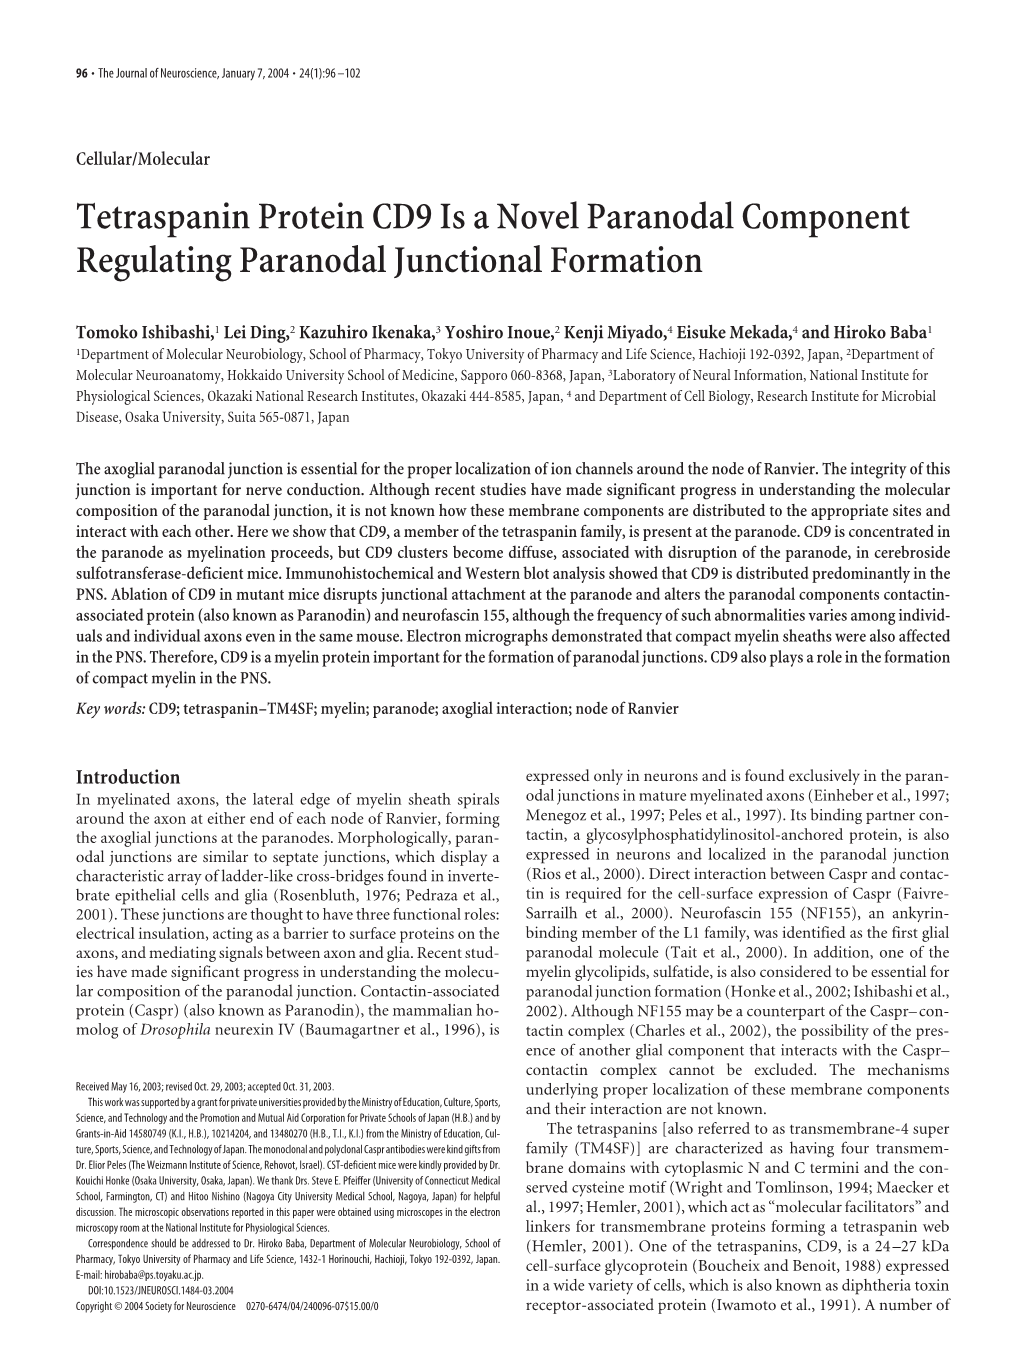 Tetraspanin Protein CD9 Is a Novel Paranodal Component Regulating Paranodal Junctional Formation